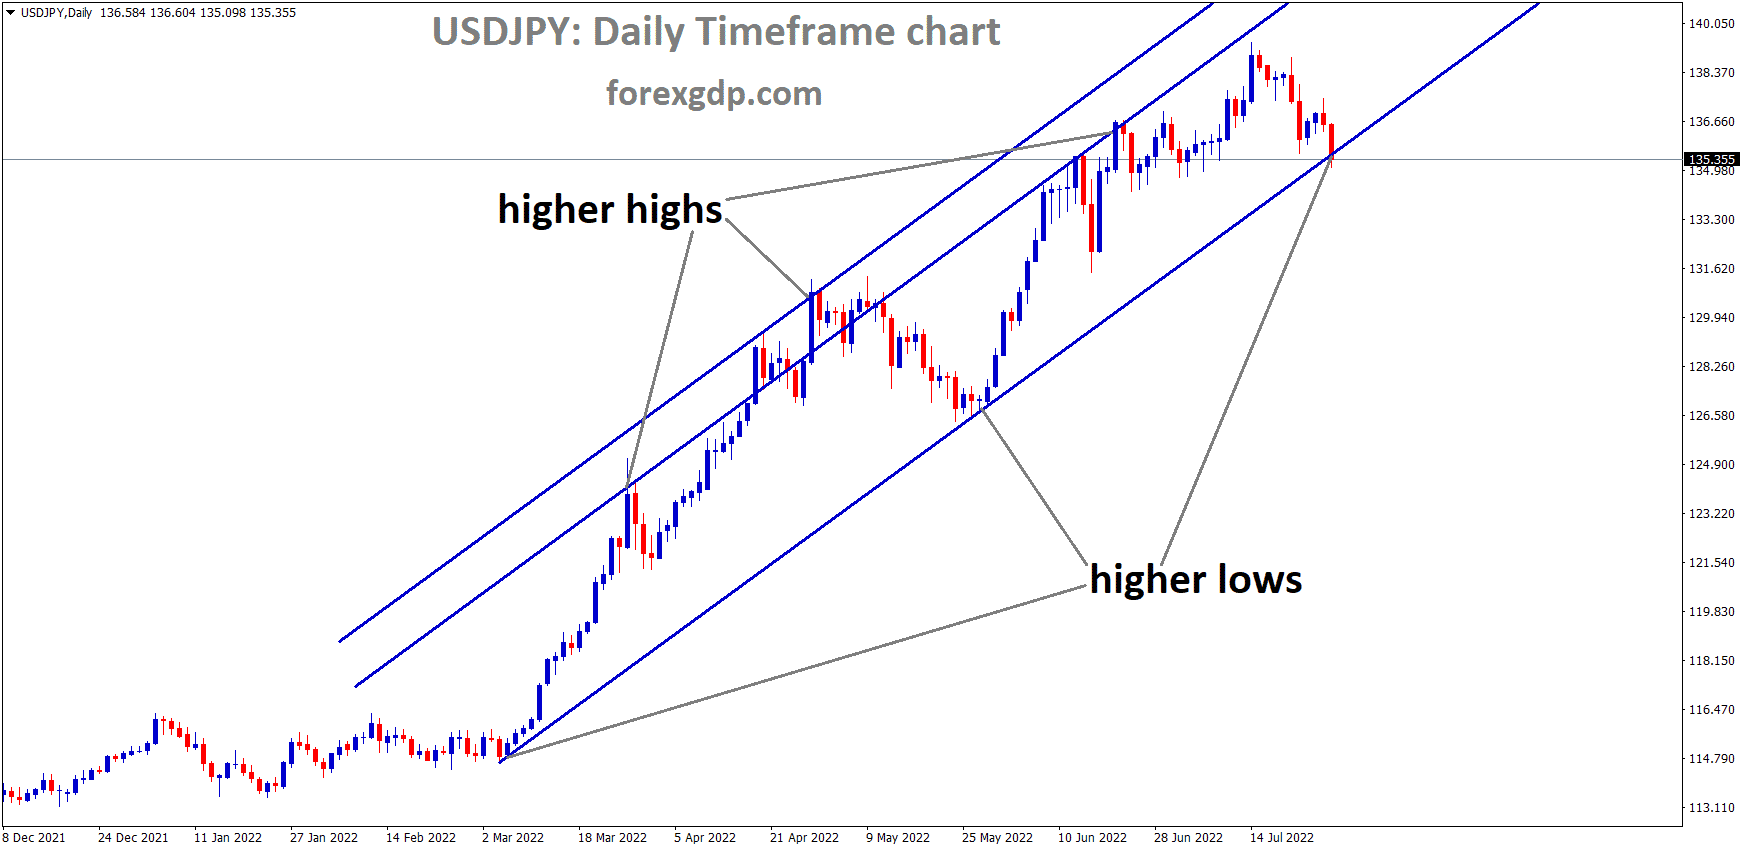 USDJPY is moving in an Ascending channel and the Market has reached the higher low area of the channel 1